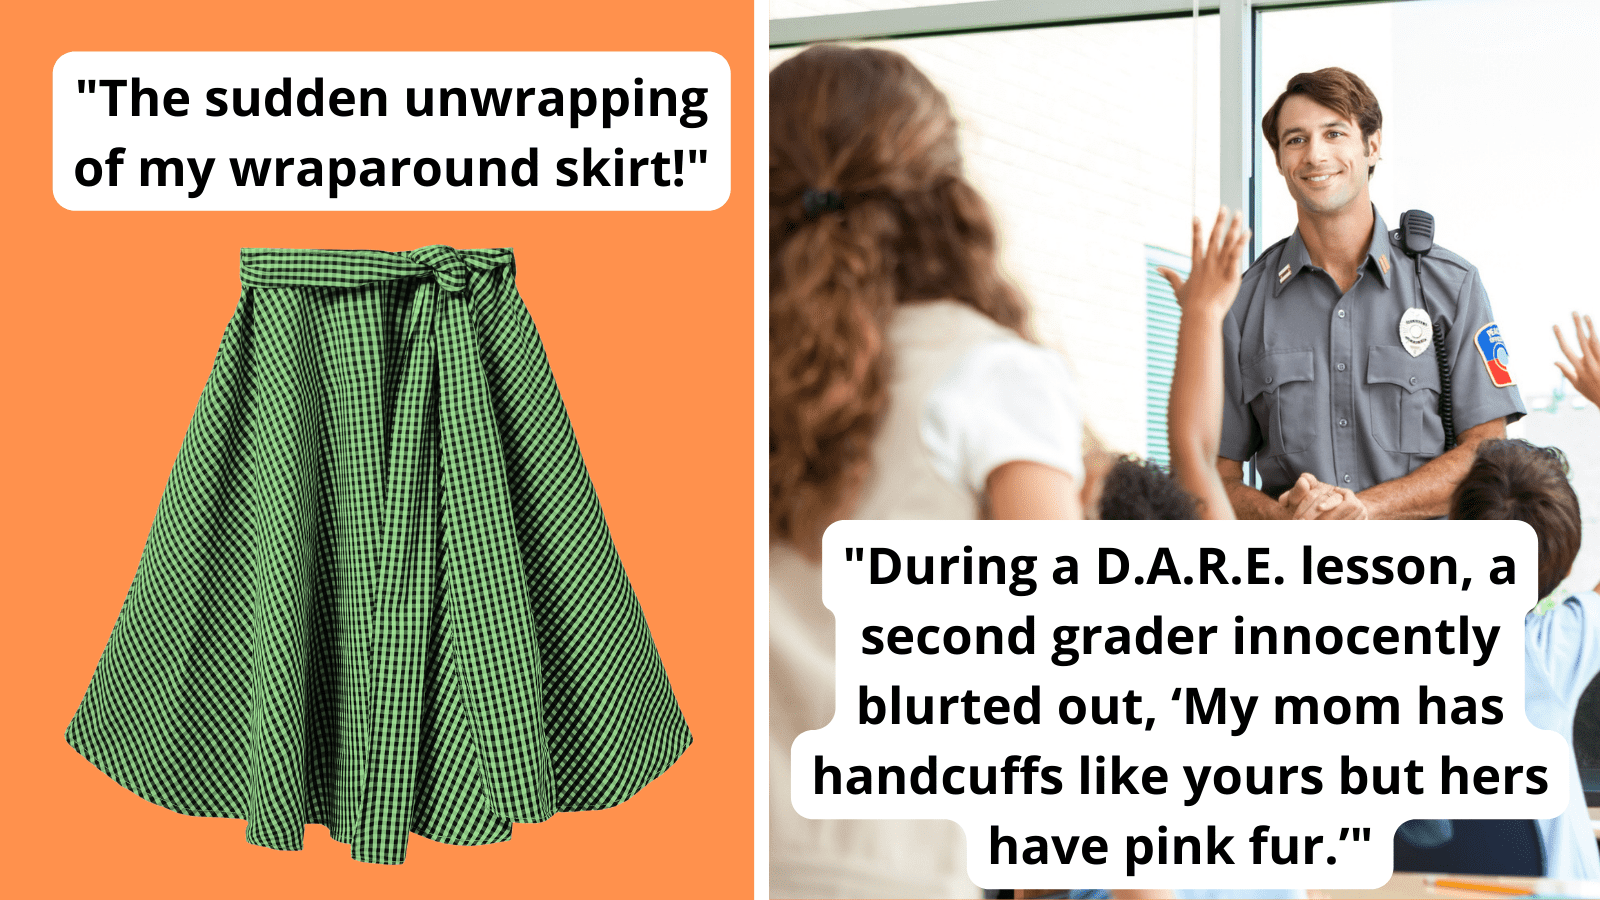 Paired image of wrap skirt and D.A.R.E. officer with examples of embarrassing teacher stories